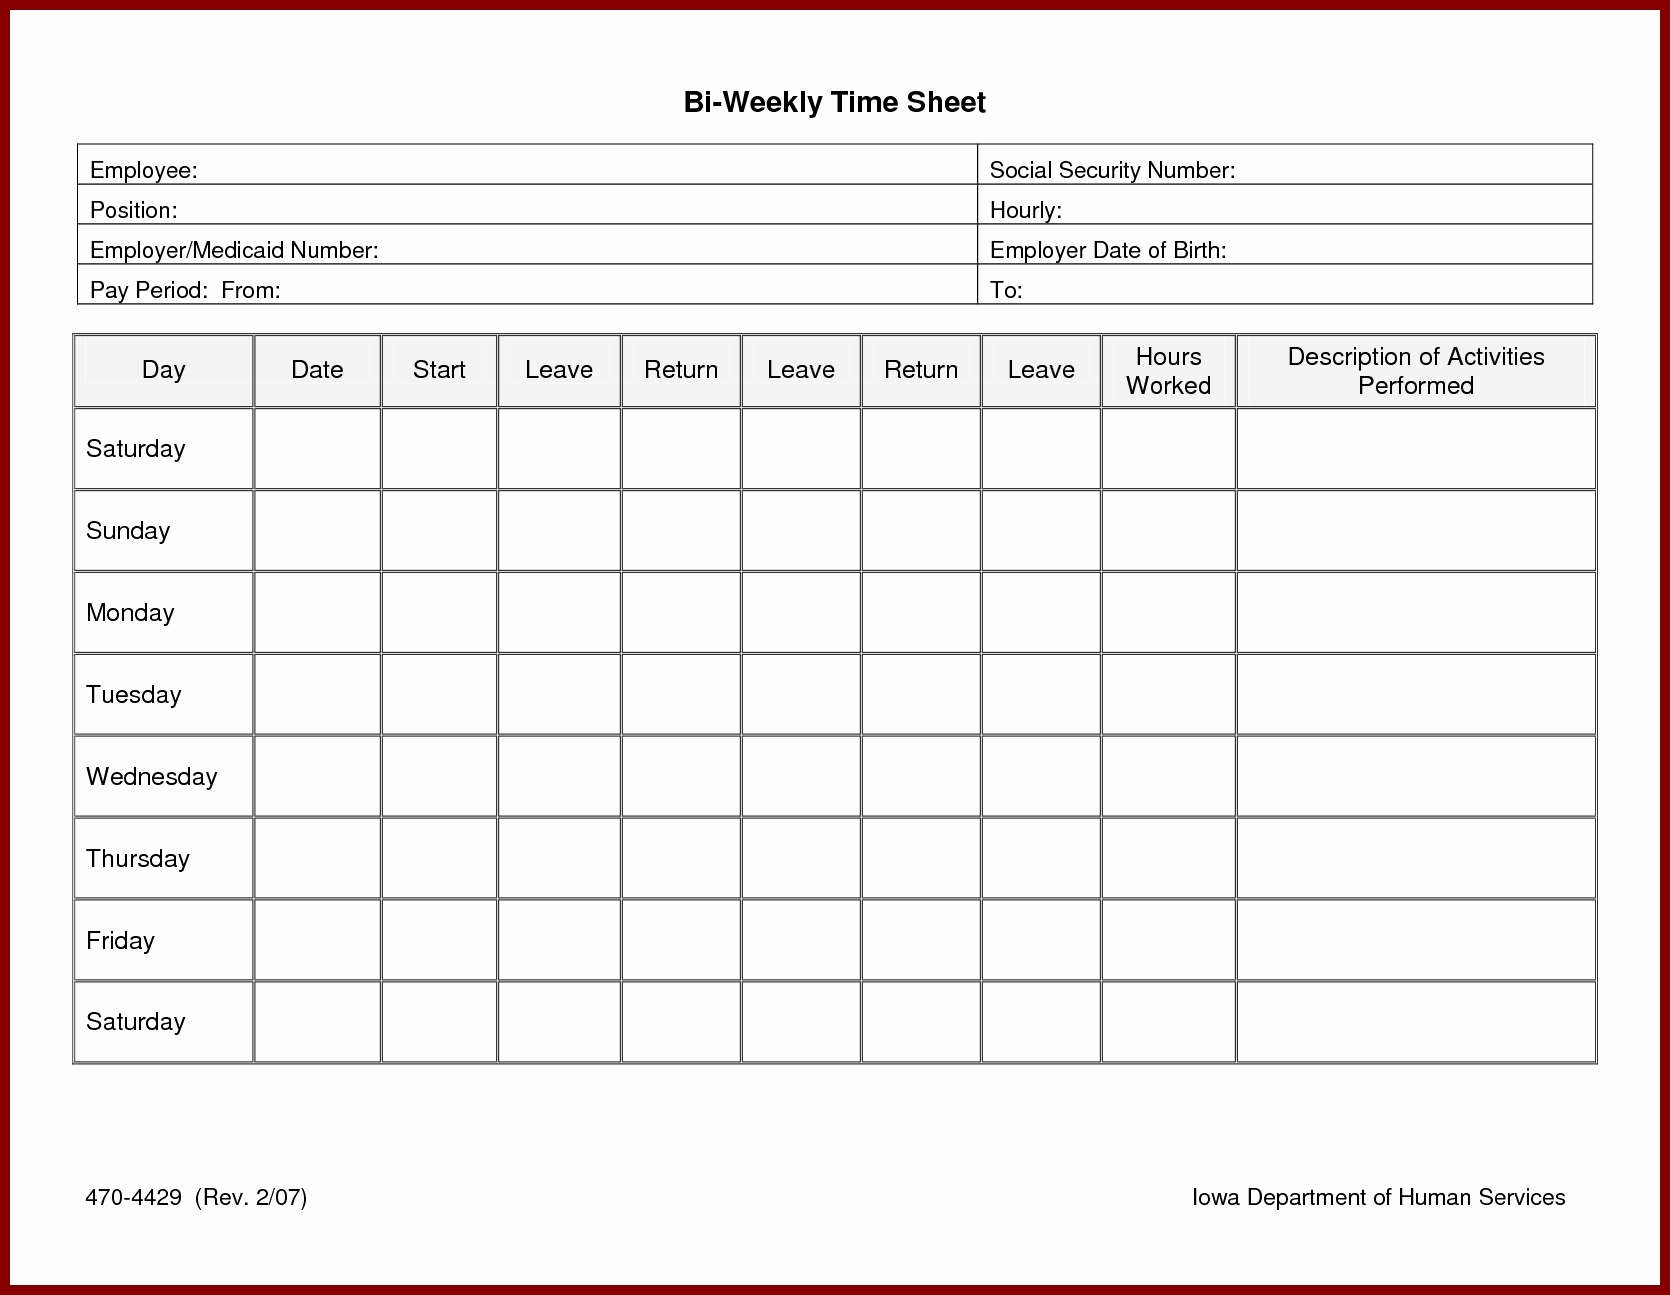 Self Assessment Tax Return Spreadsheet Template Within Business Expense Spreadsheet For Taxes Beautiful Tax Return For Tax